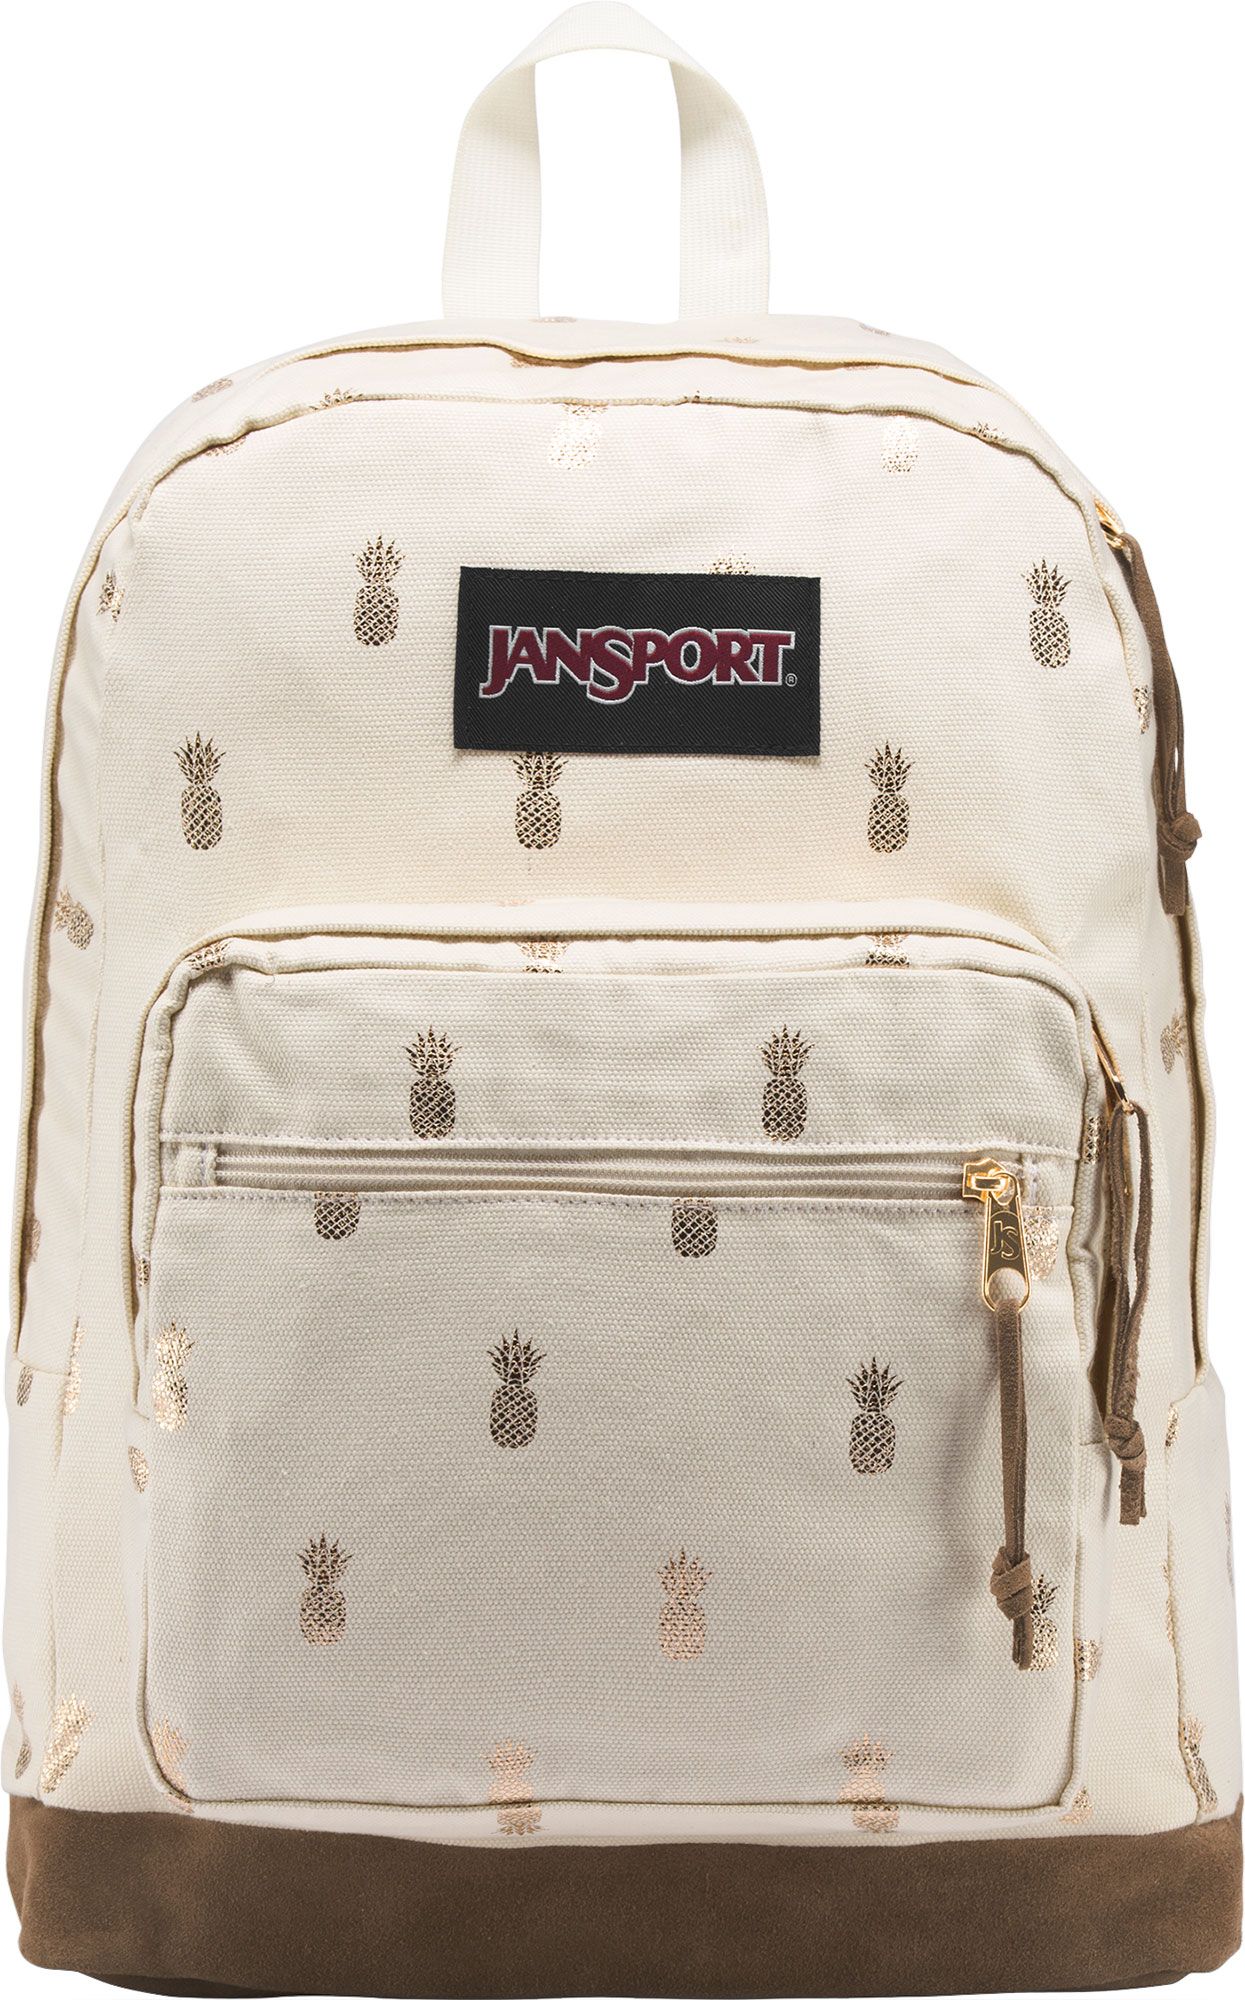 JanSport Right Pack Expressions Backpack - image 1 of 4